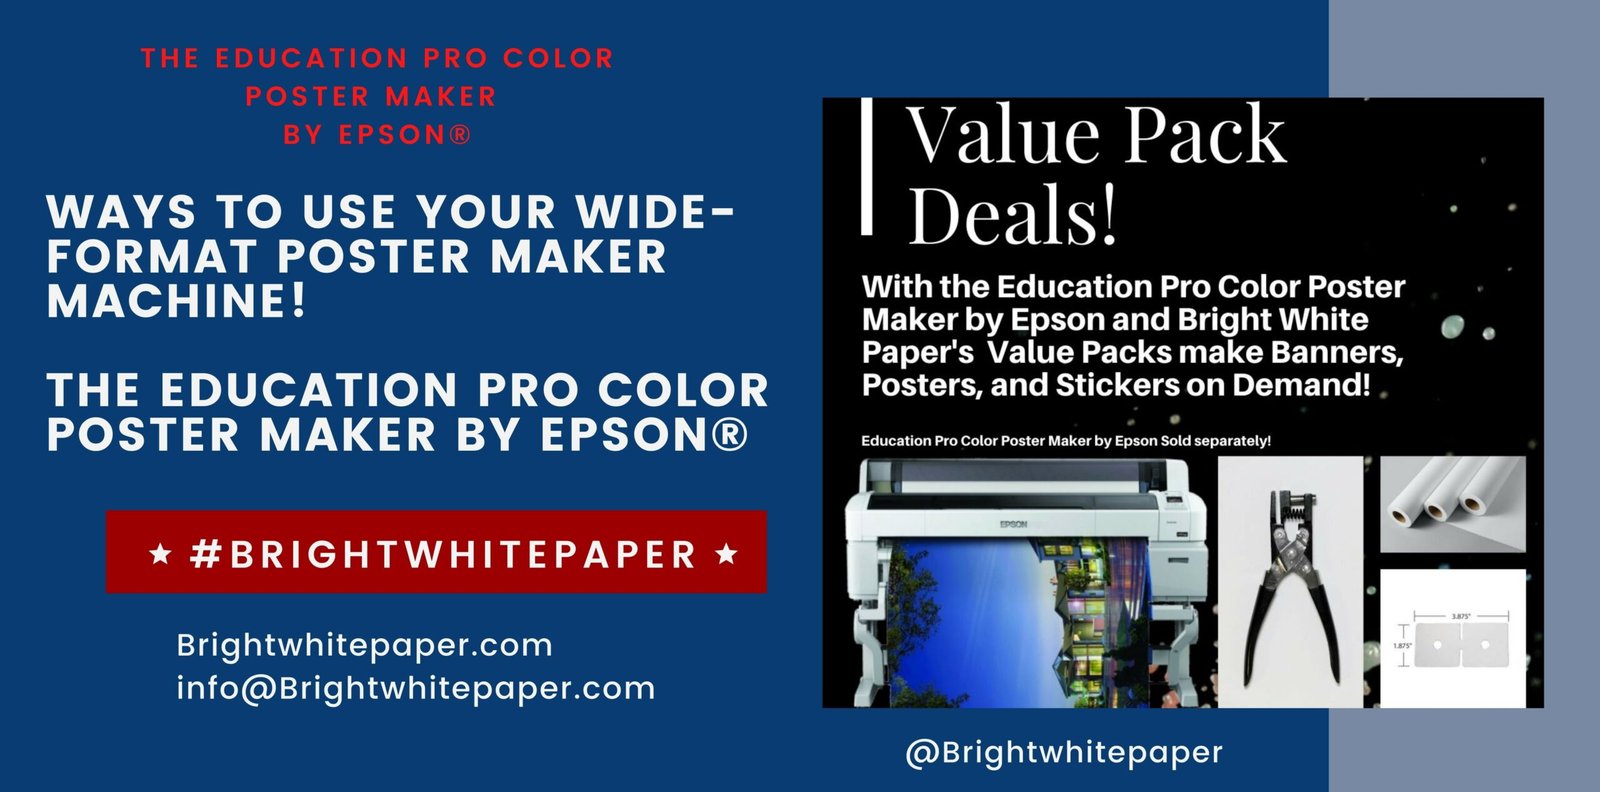 The Education Pro Color Poster Maker Machine by Epson!